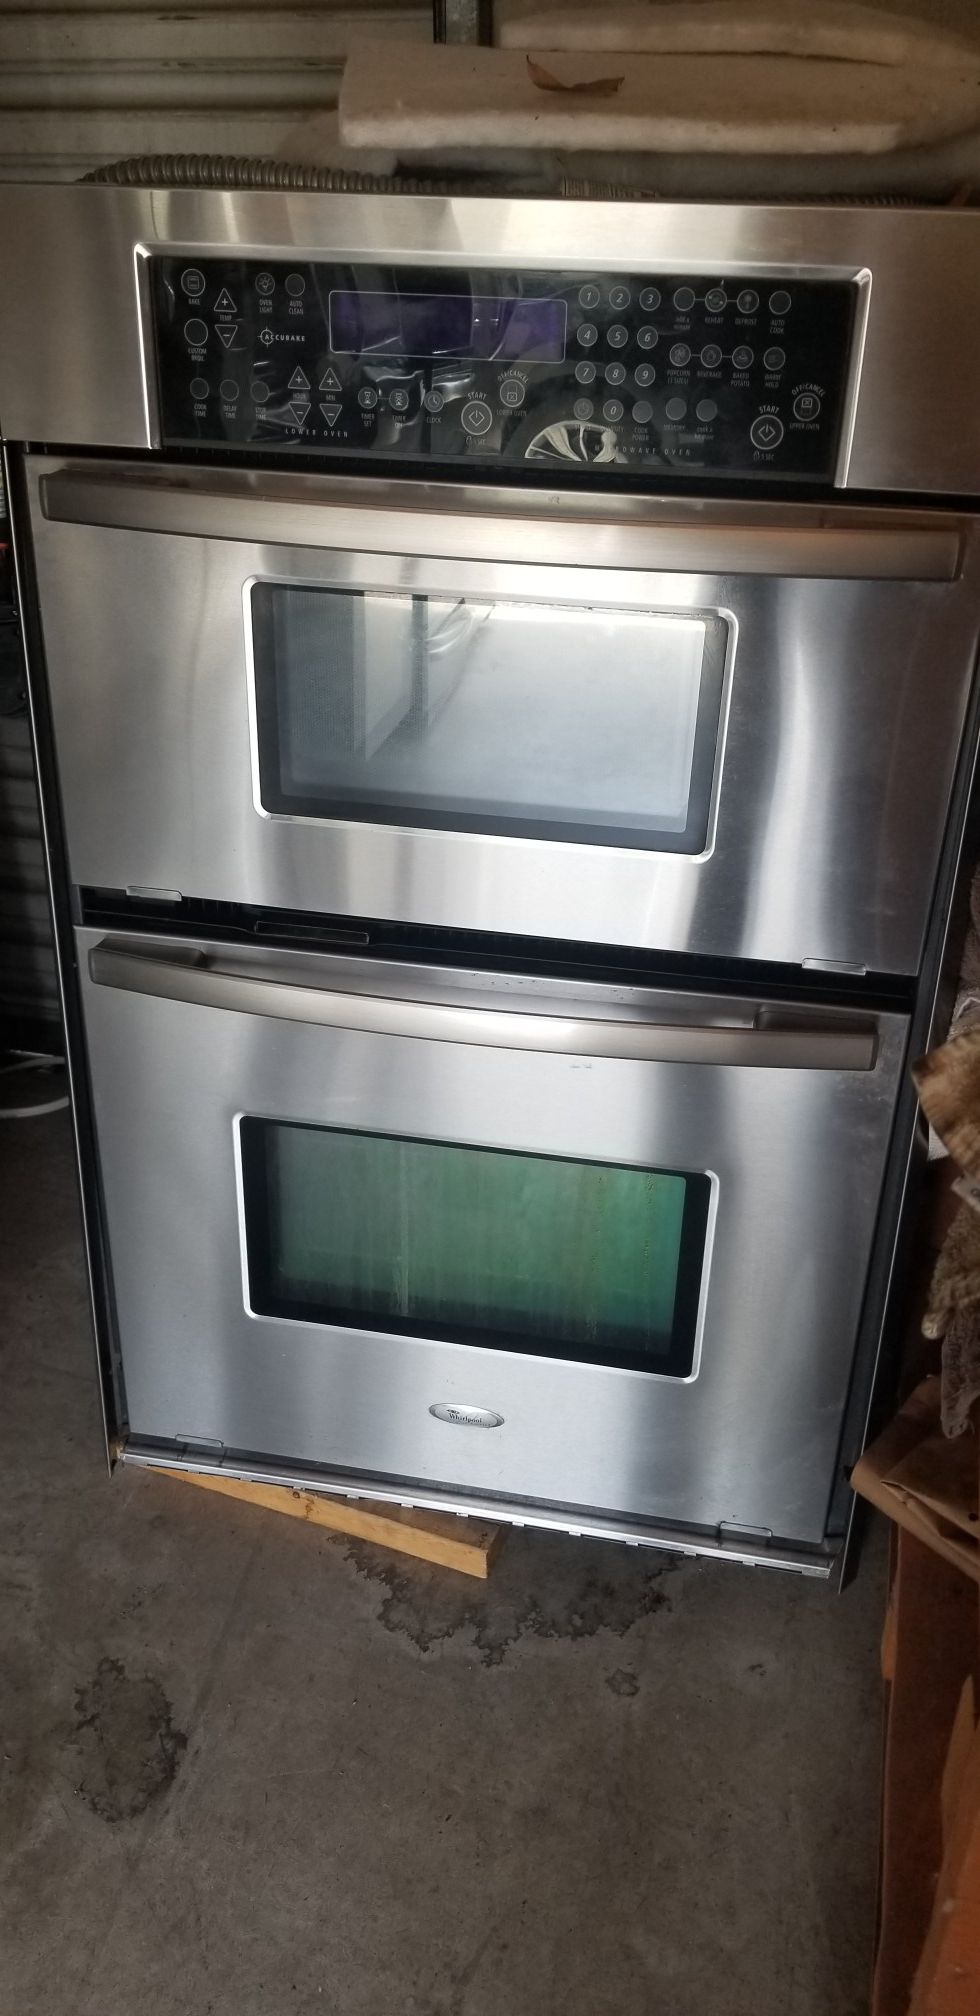 Whirlpool 27" stainless steel microwave and oven combo